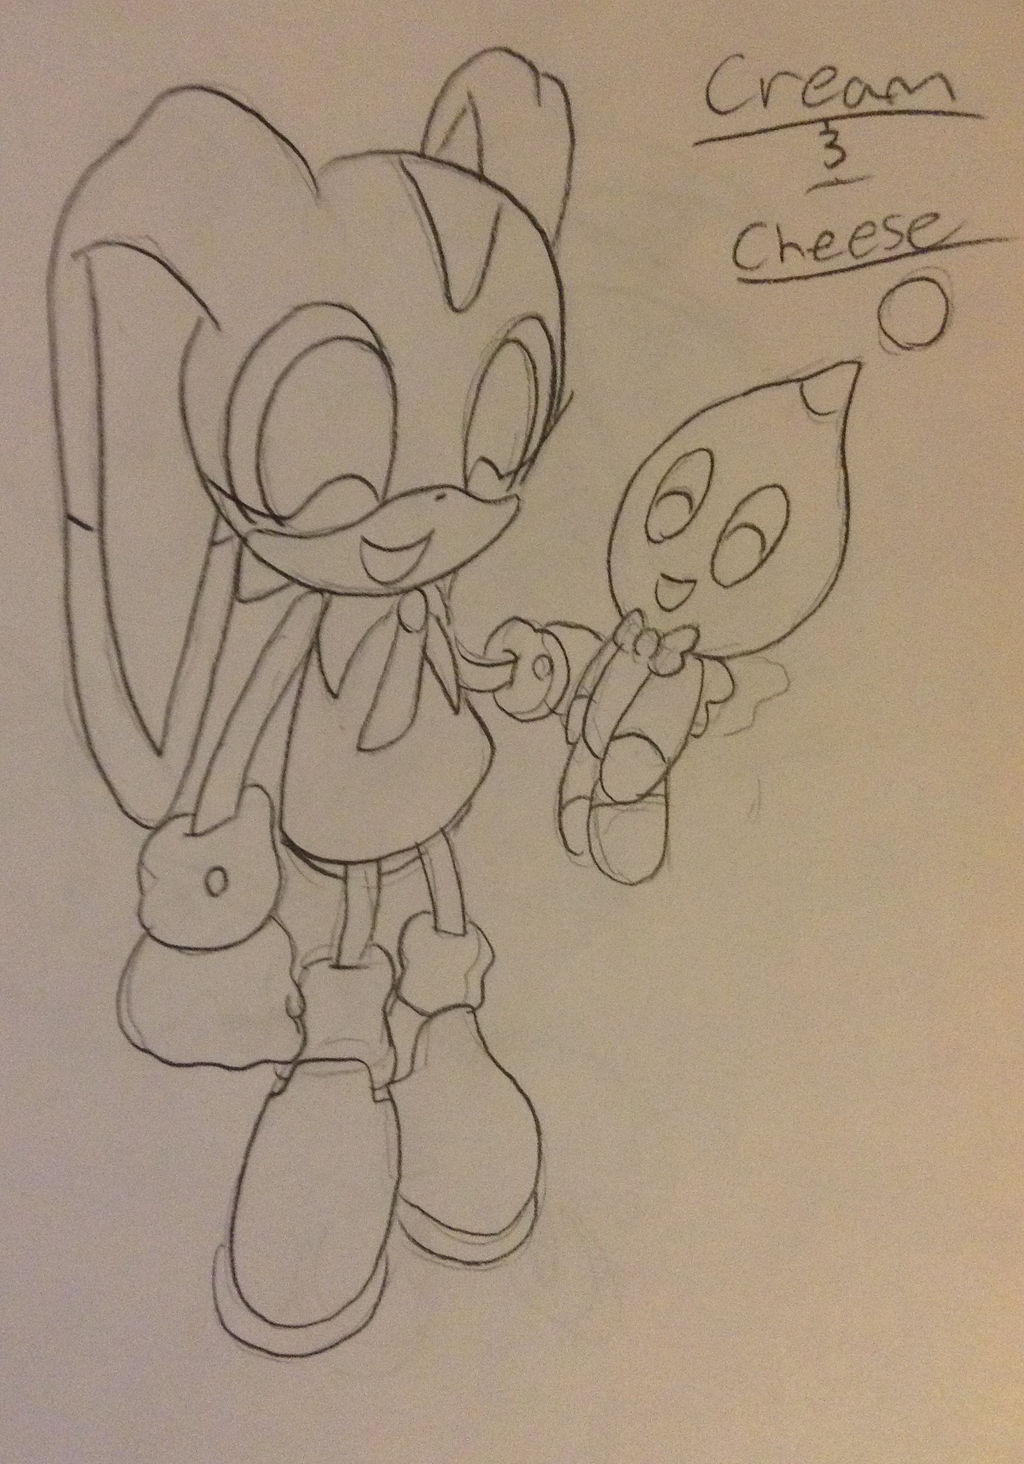 Cream and Cheese SKETCH